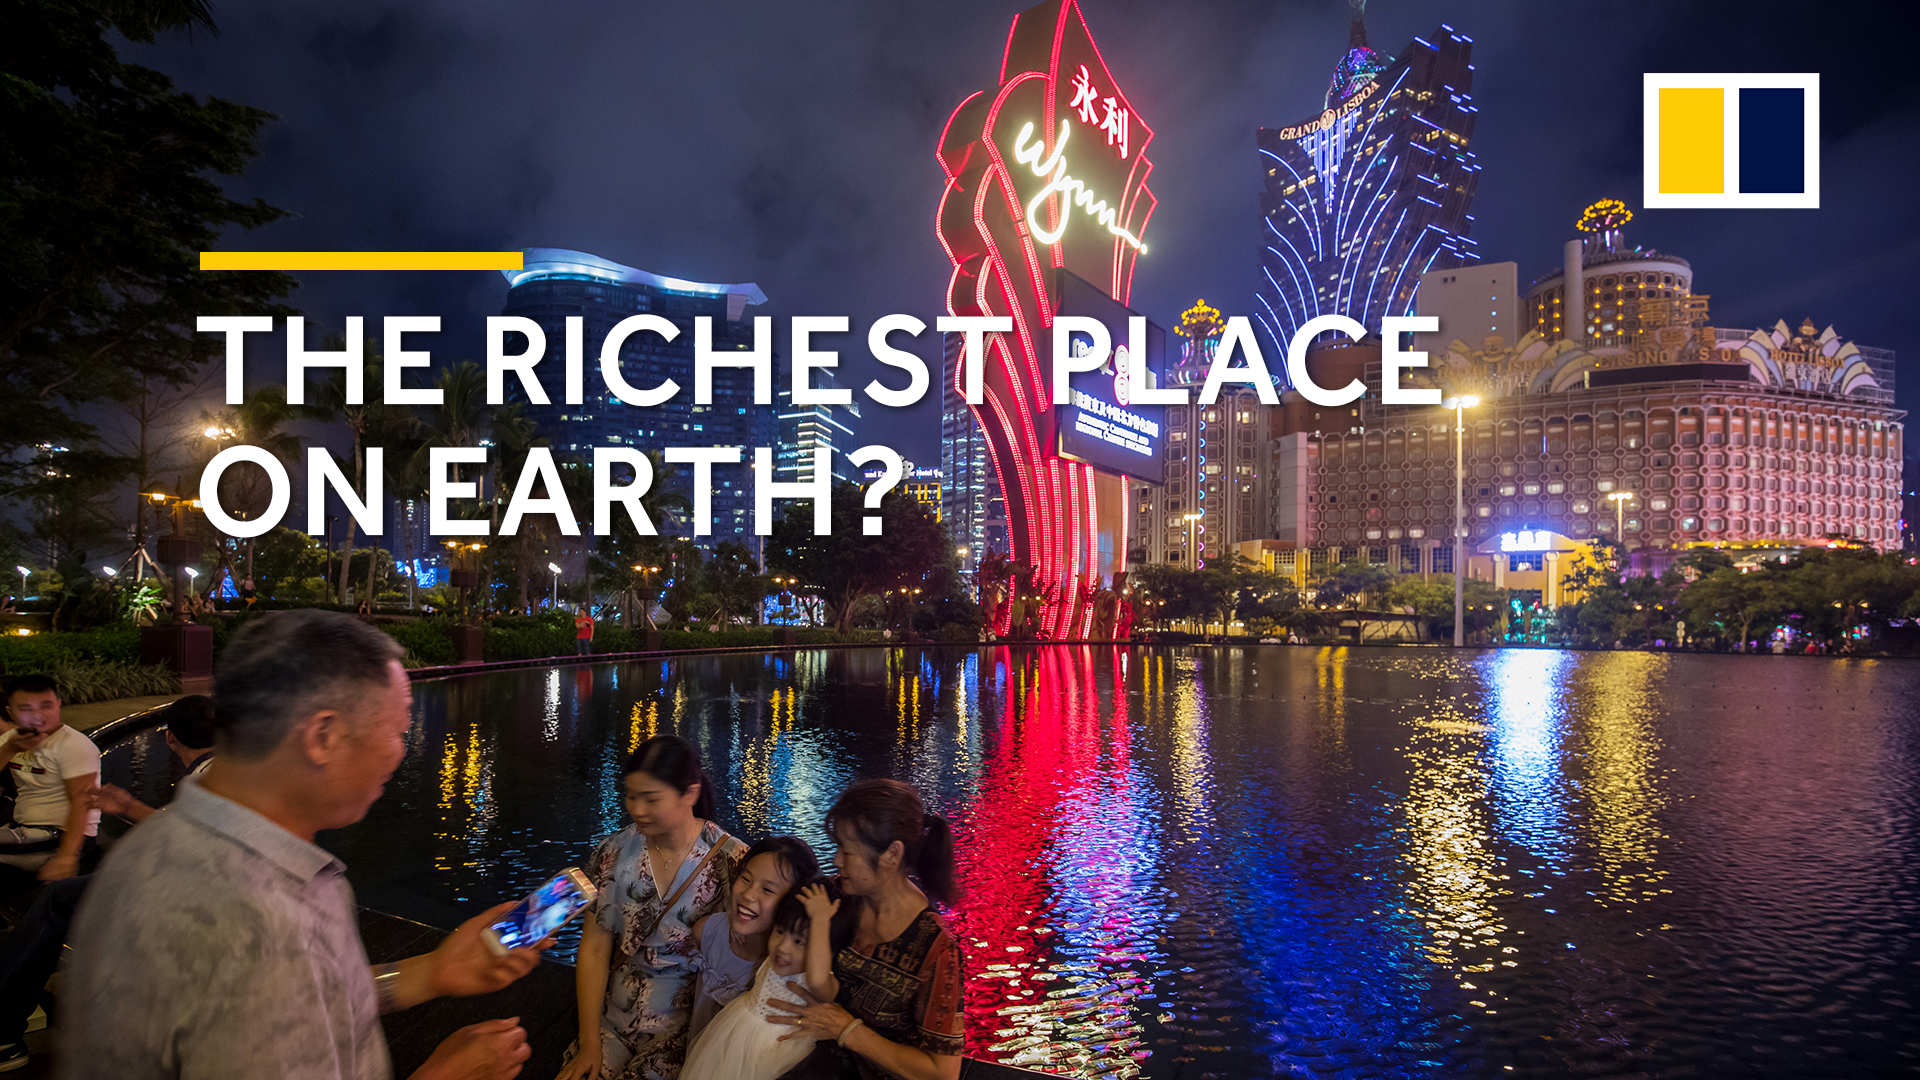 Reach a place. Welcome to the Richest place on Earth in Australia.